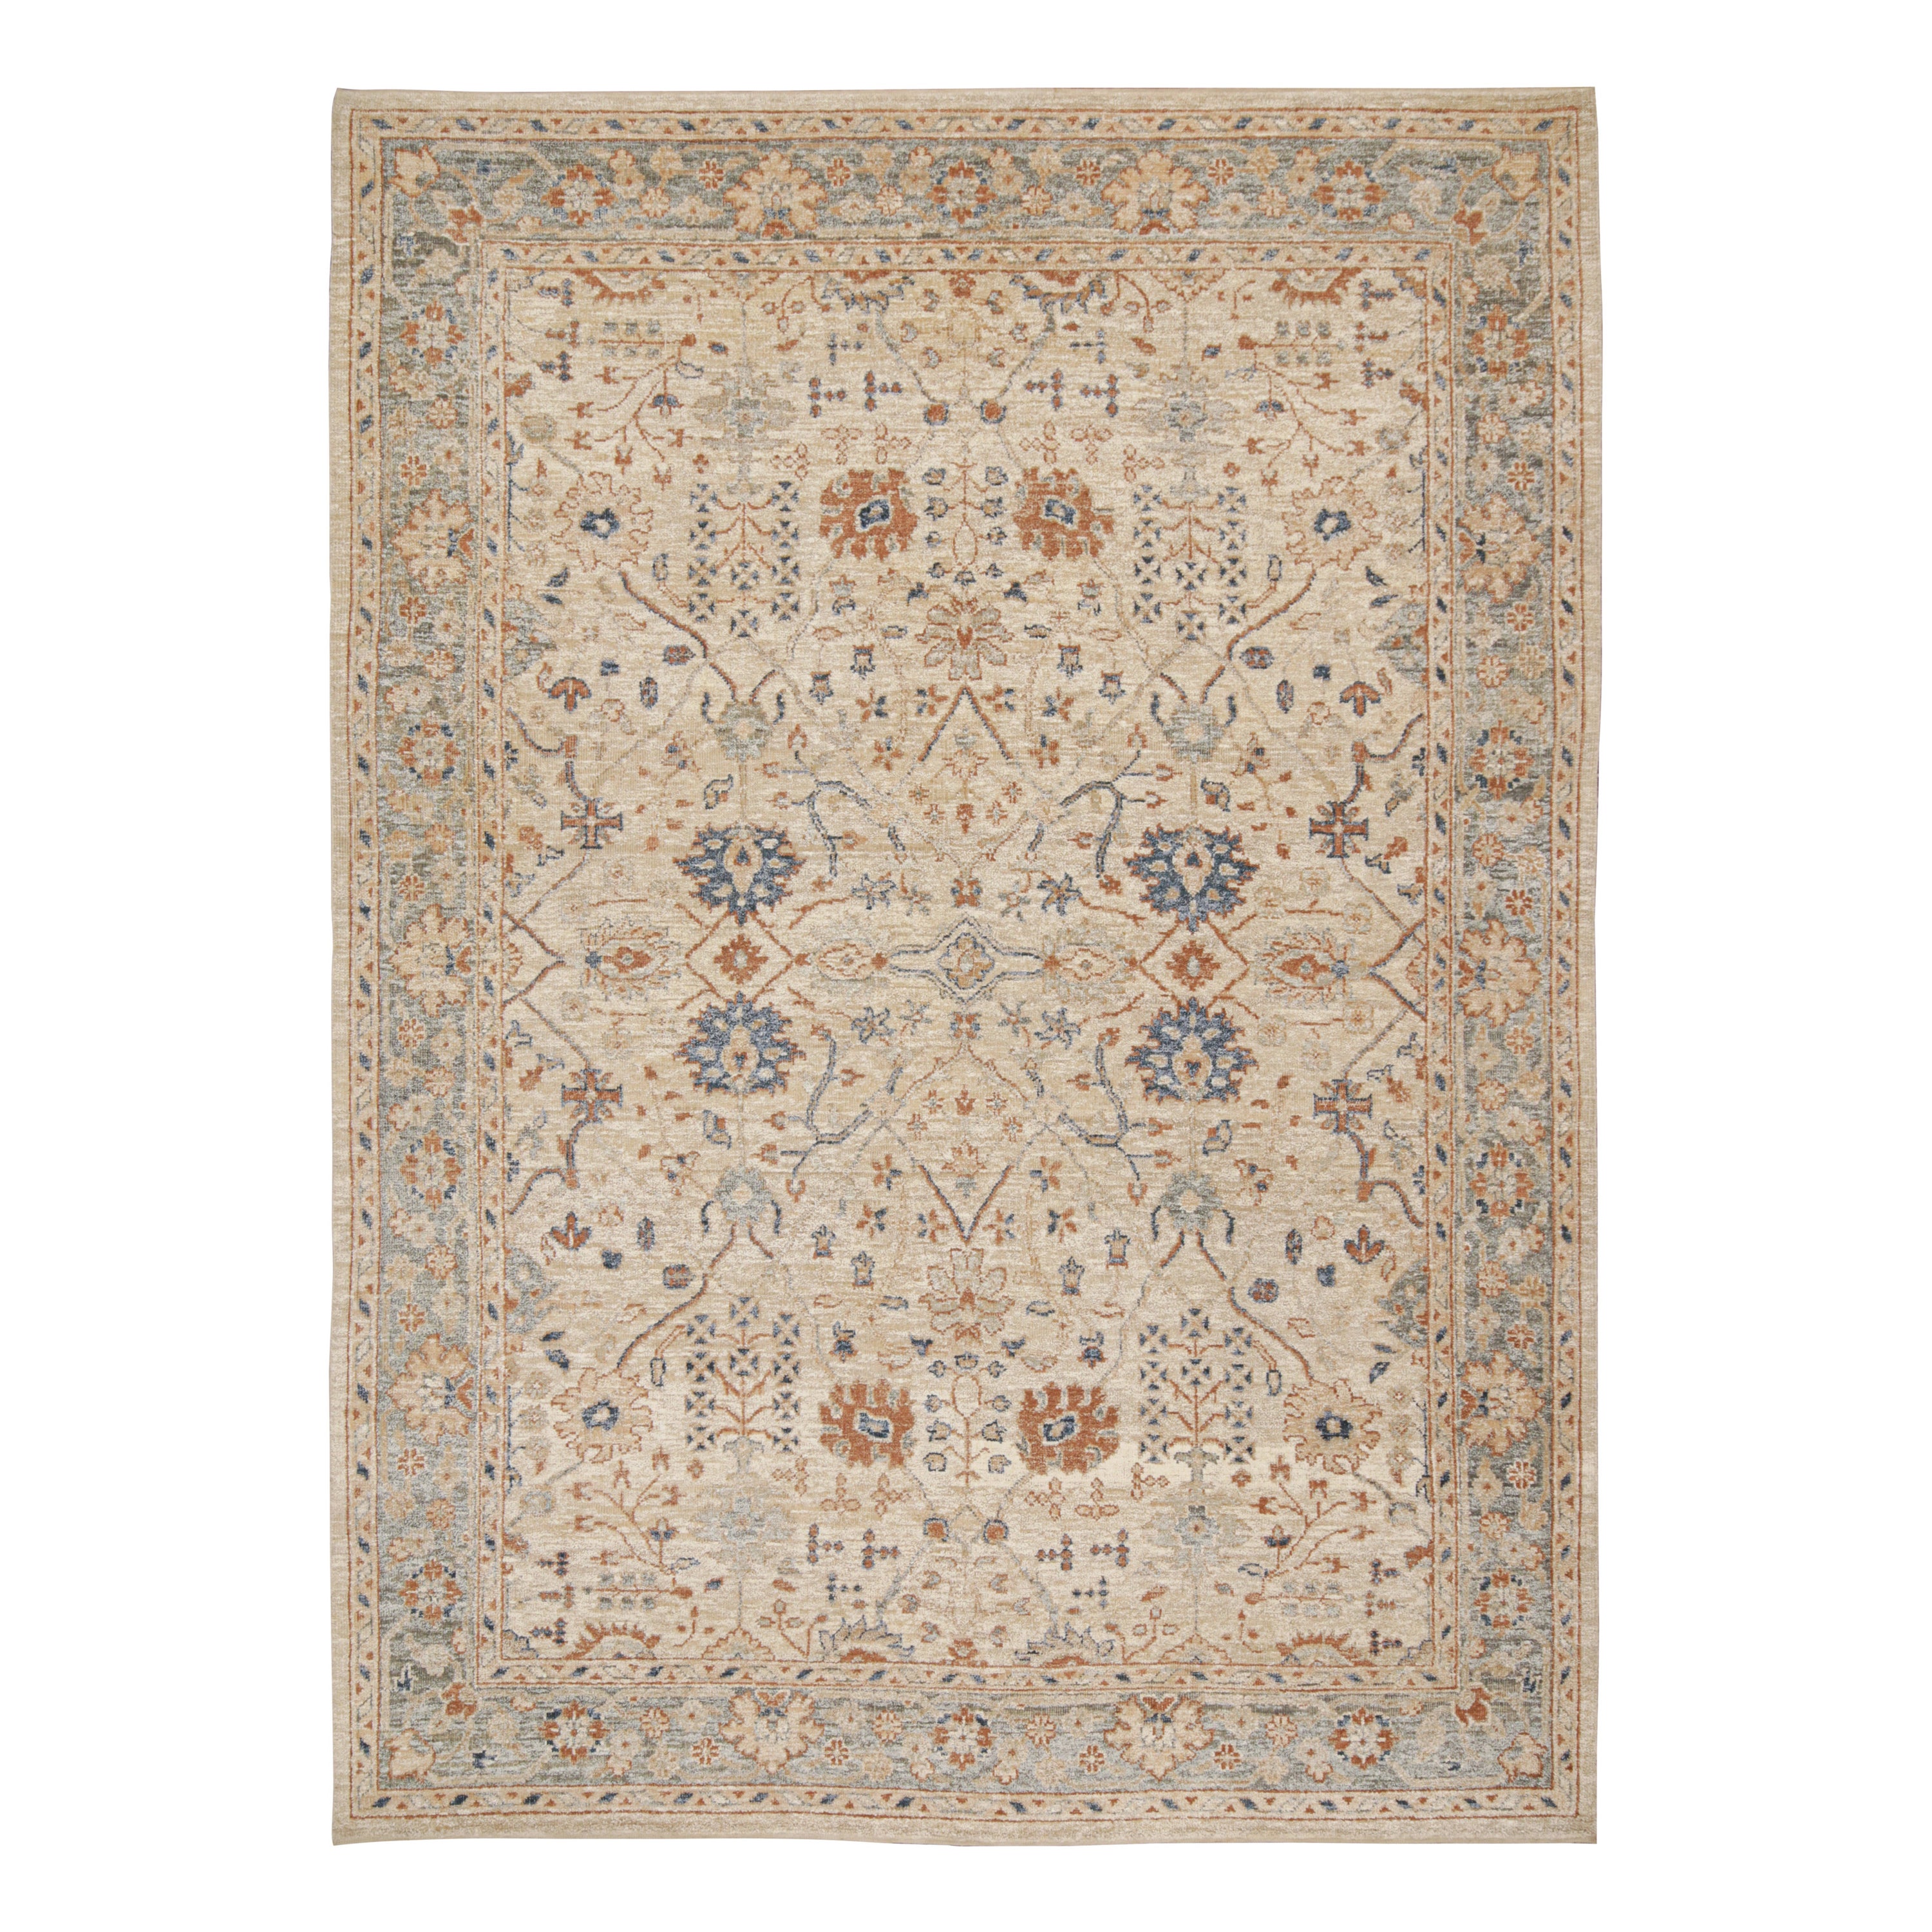 Rug & Kilim’s Oushak Style Rug in Cream, Blue, Beige-Brown Geometric Patterns For Sale